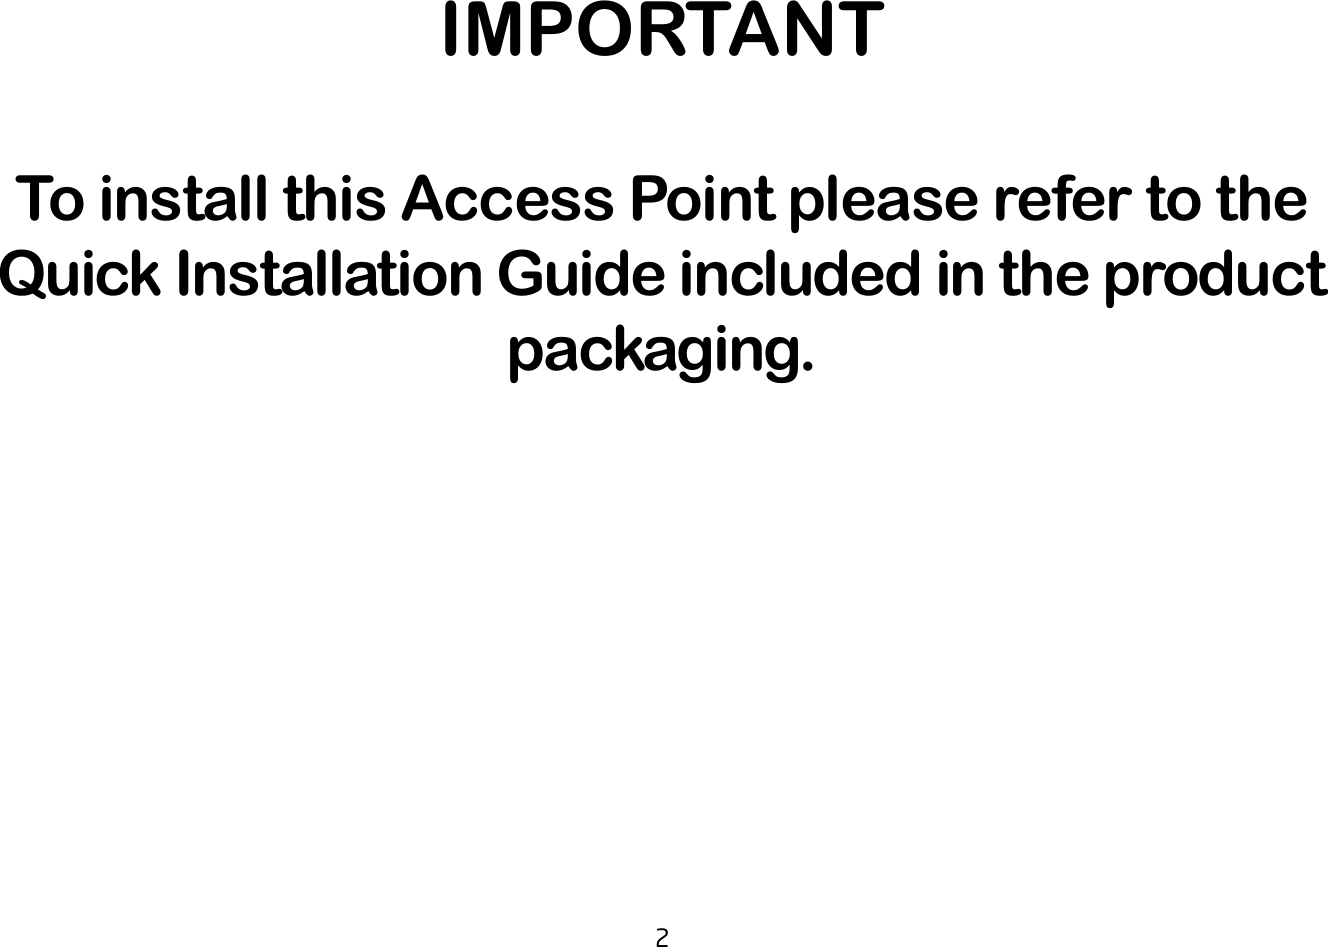 2IMPORTANTTo install this Access Point please refer to the  Quick Installation Guide included in the product packaging.